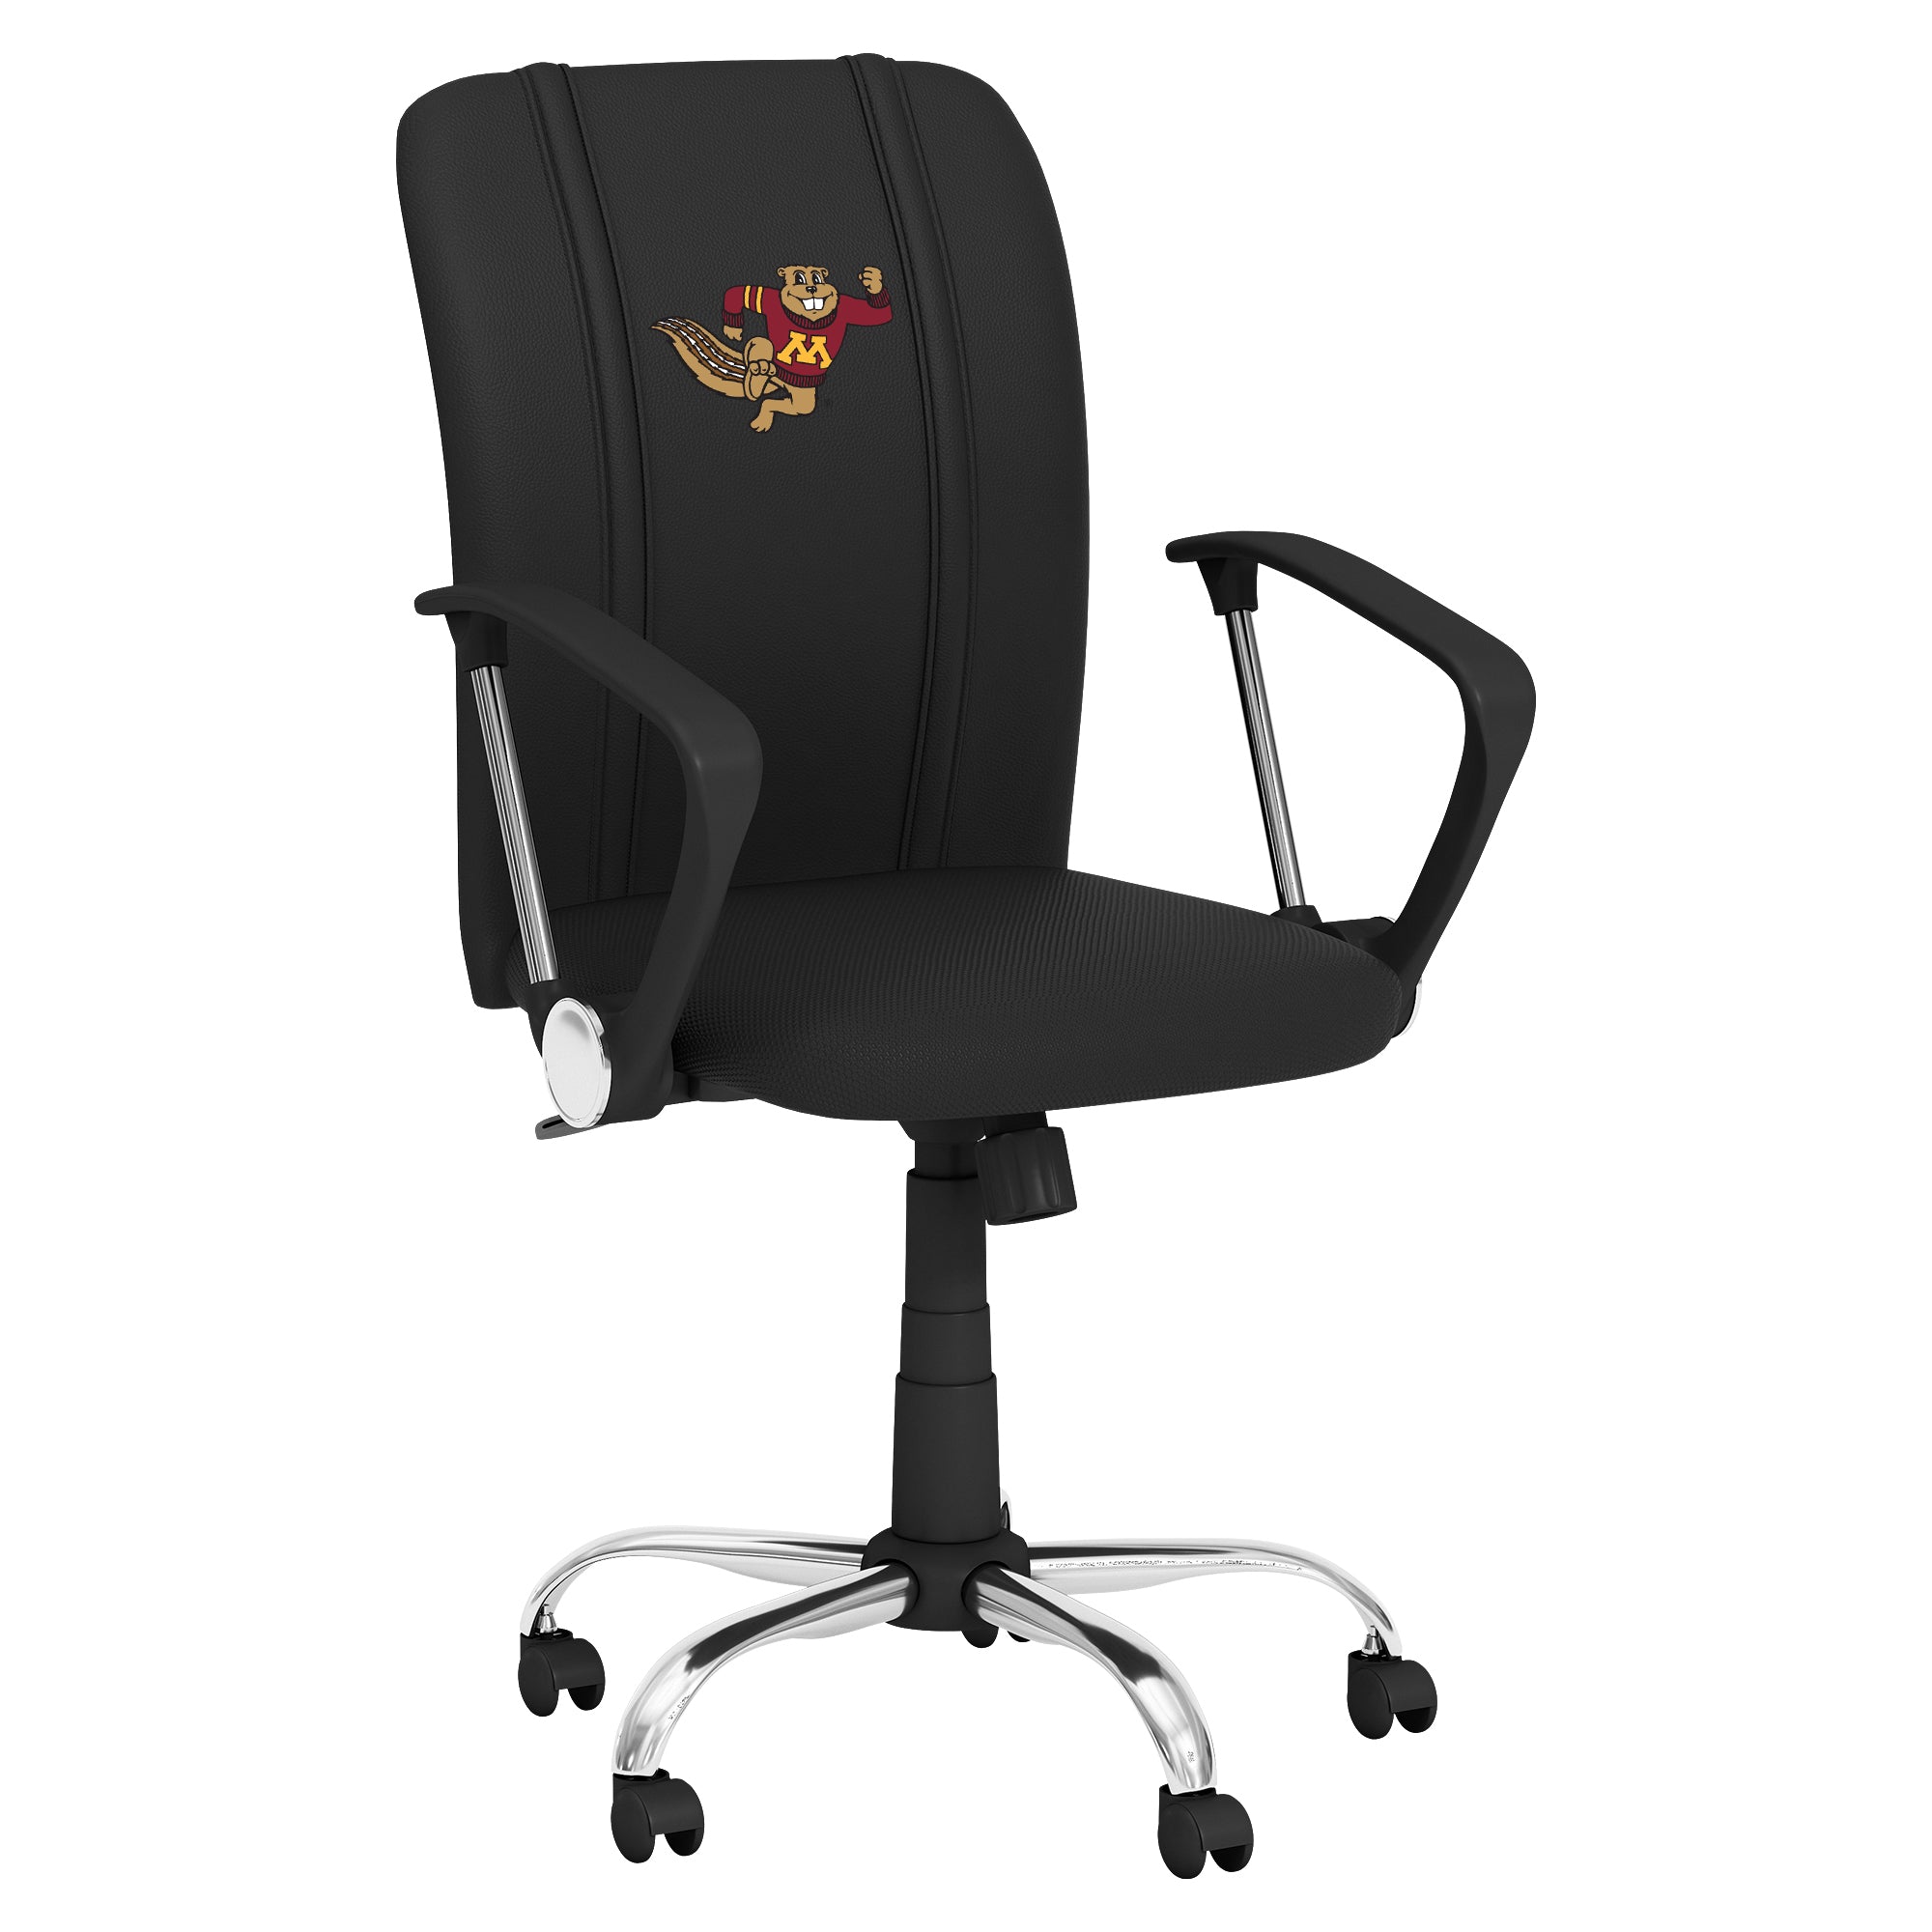 University of Minnesota Curve Task Chair with University of Minnesota Secondary Logo